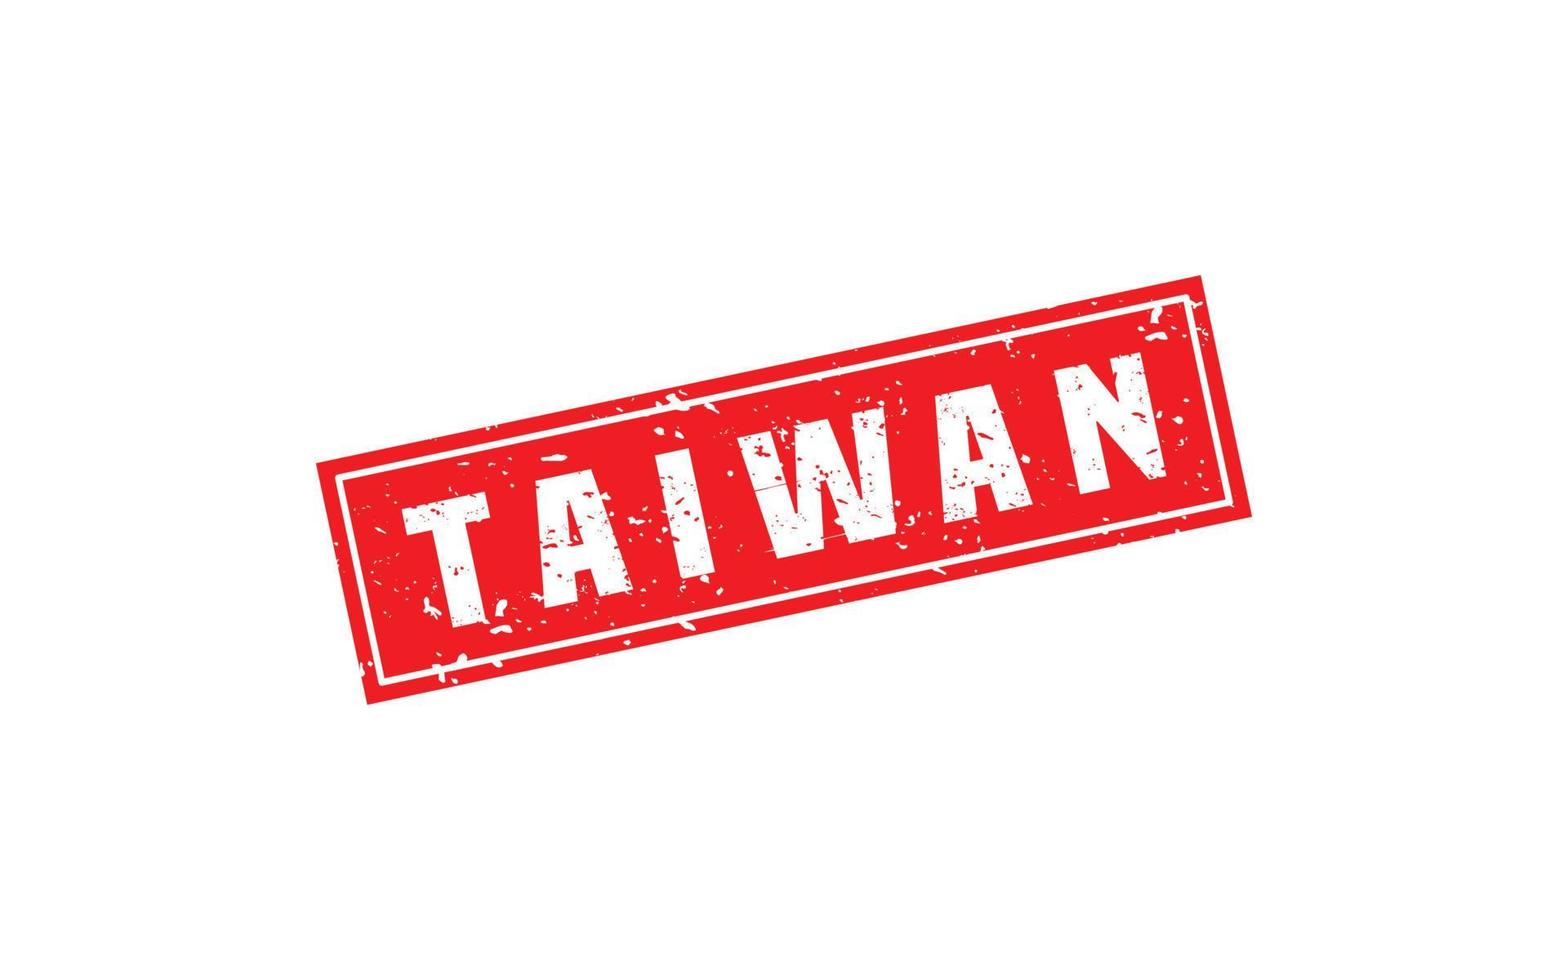 TAIWAN stamp rubber with grunge style on white background vector